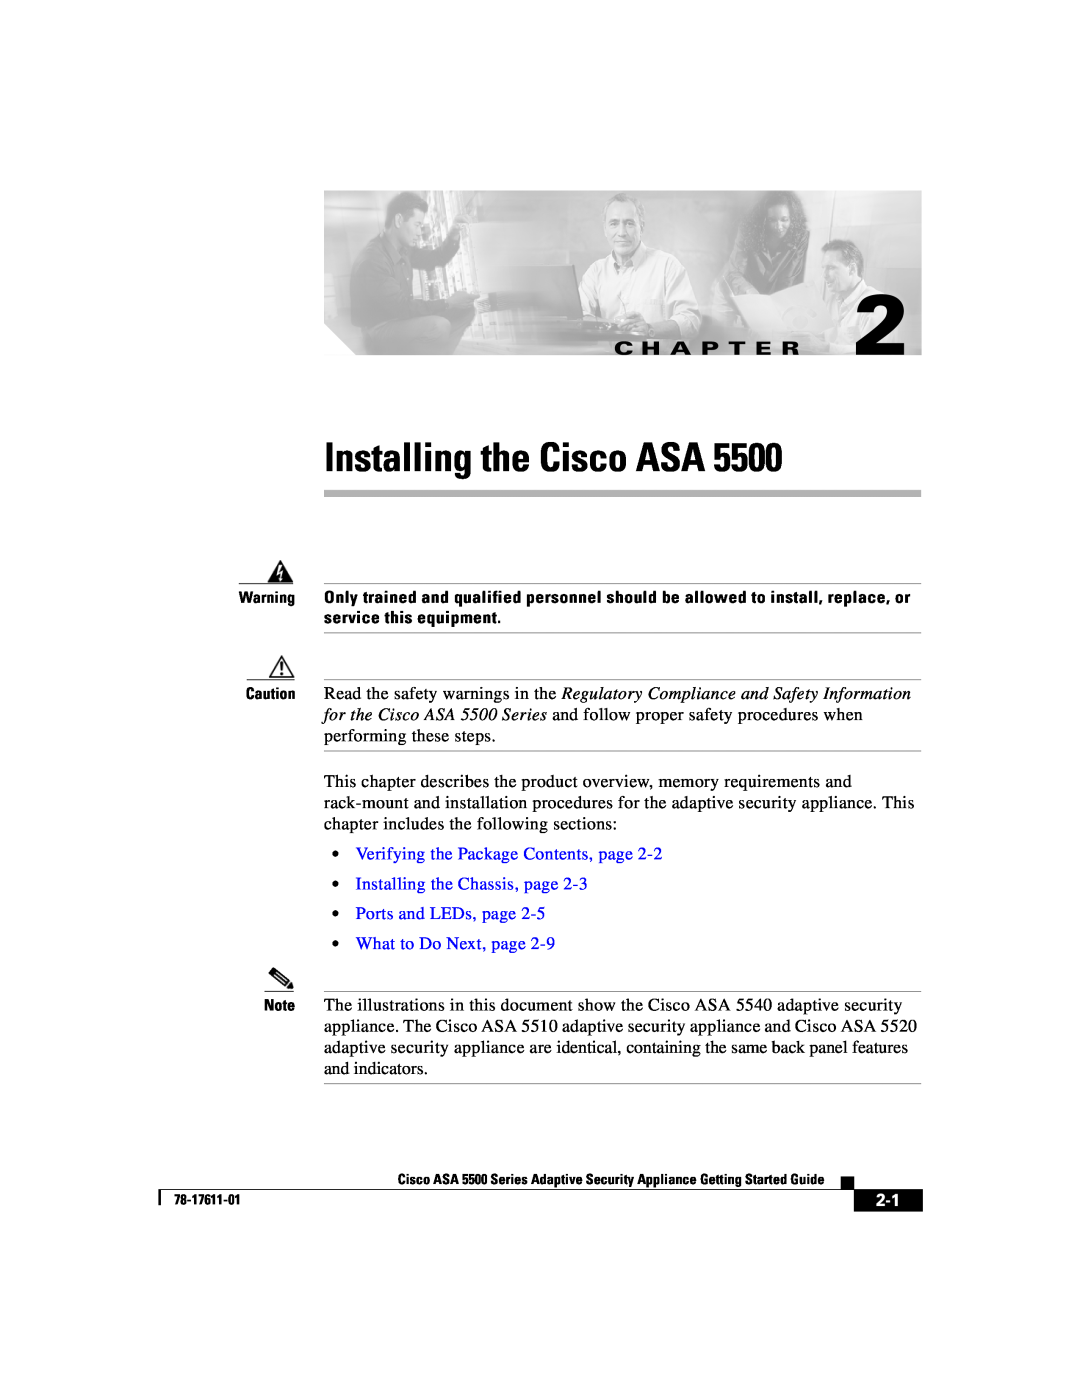 Cisco Systems ASA 5500 manual Installing the Cisco ASA, C H A P T E R, Verifying the Package Contents, page 